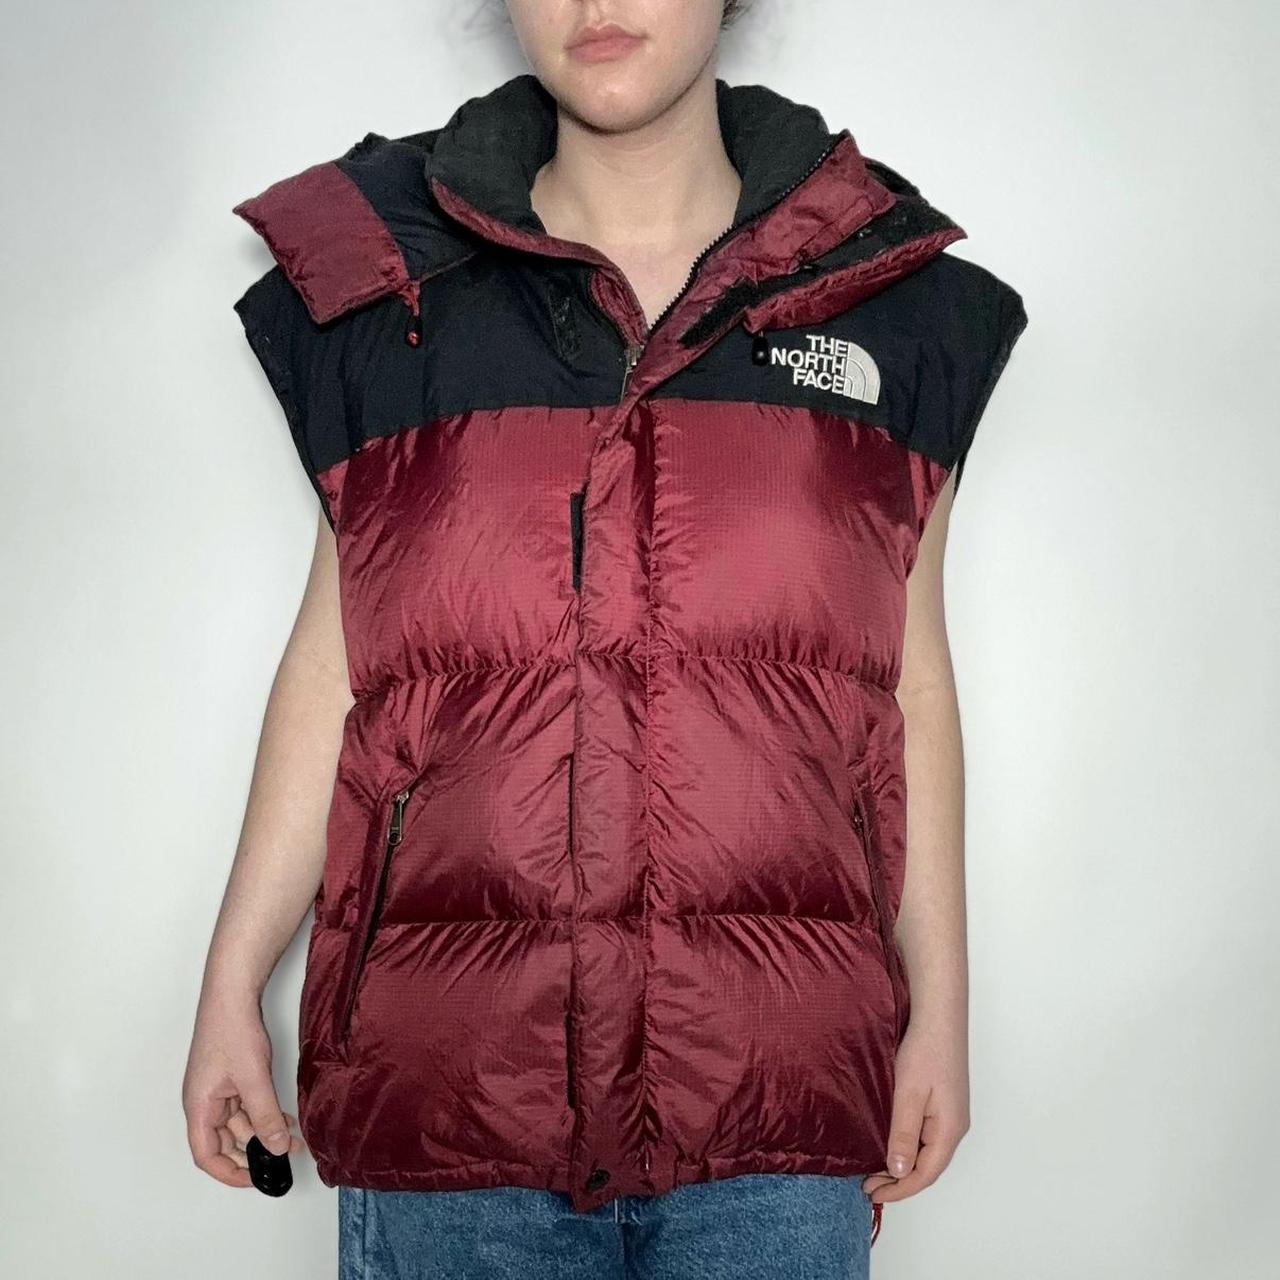 Vintage 90s The North Face summit series puffer gilet in red